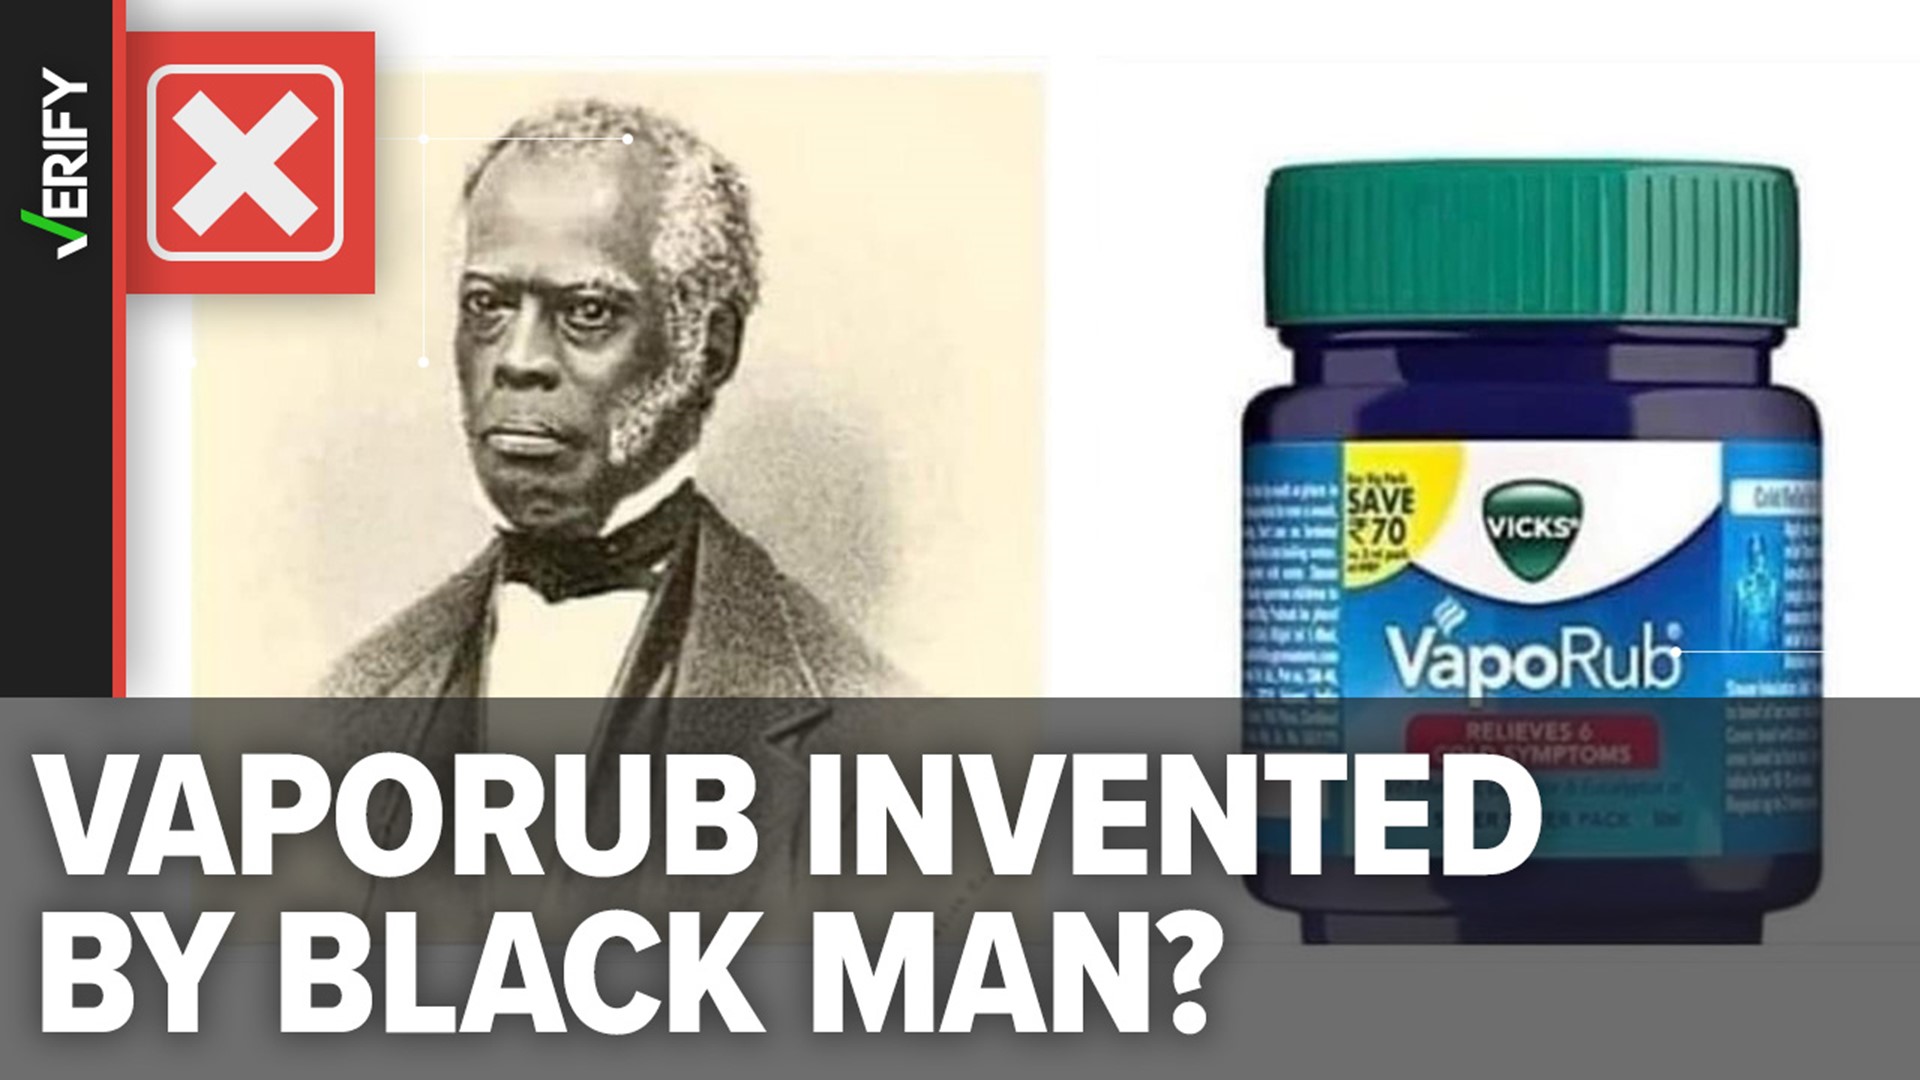 Lunsford Lane, the Black man pictured in the meme, didn’t invent Vicks, but he was a successful businessman, author and abolitionist who purchased his own freedom.